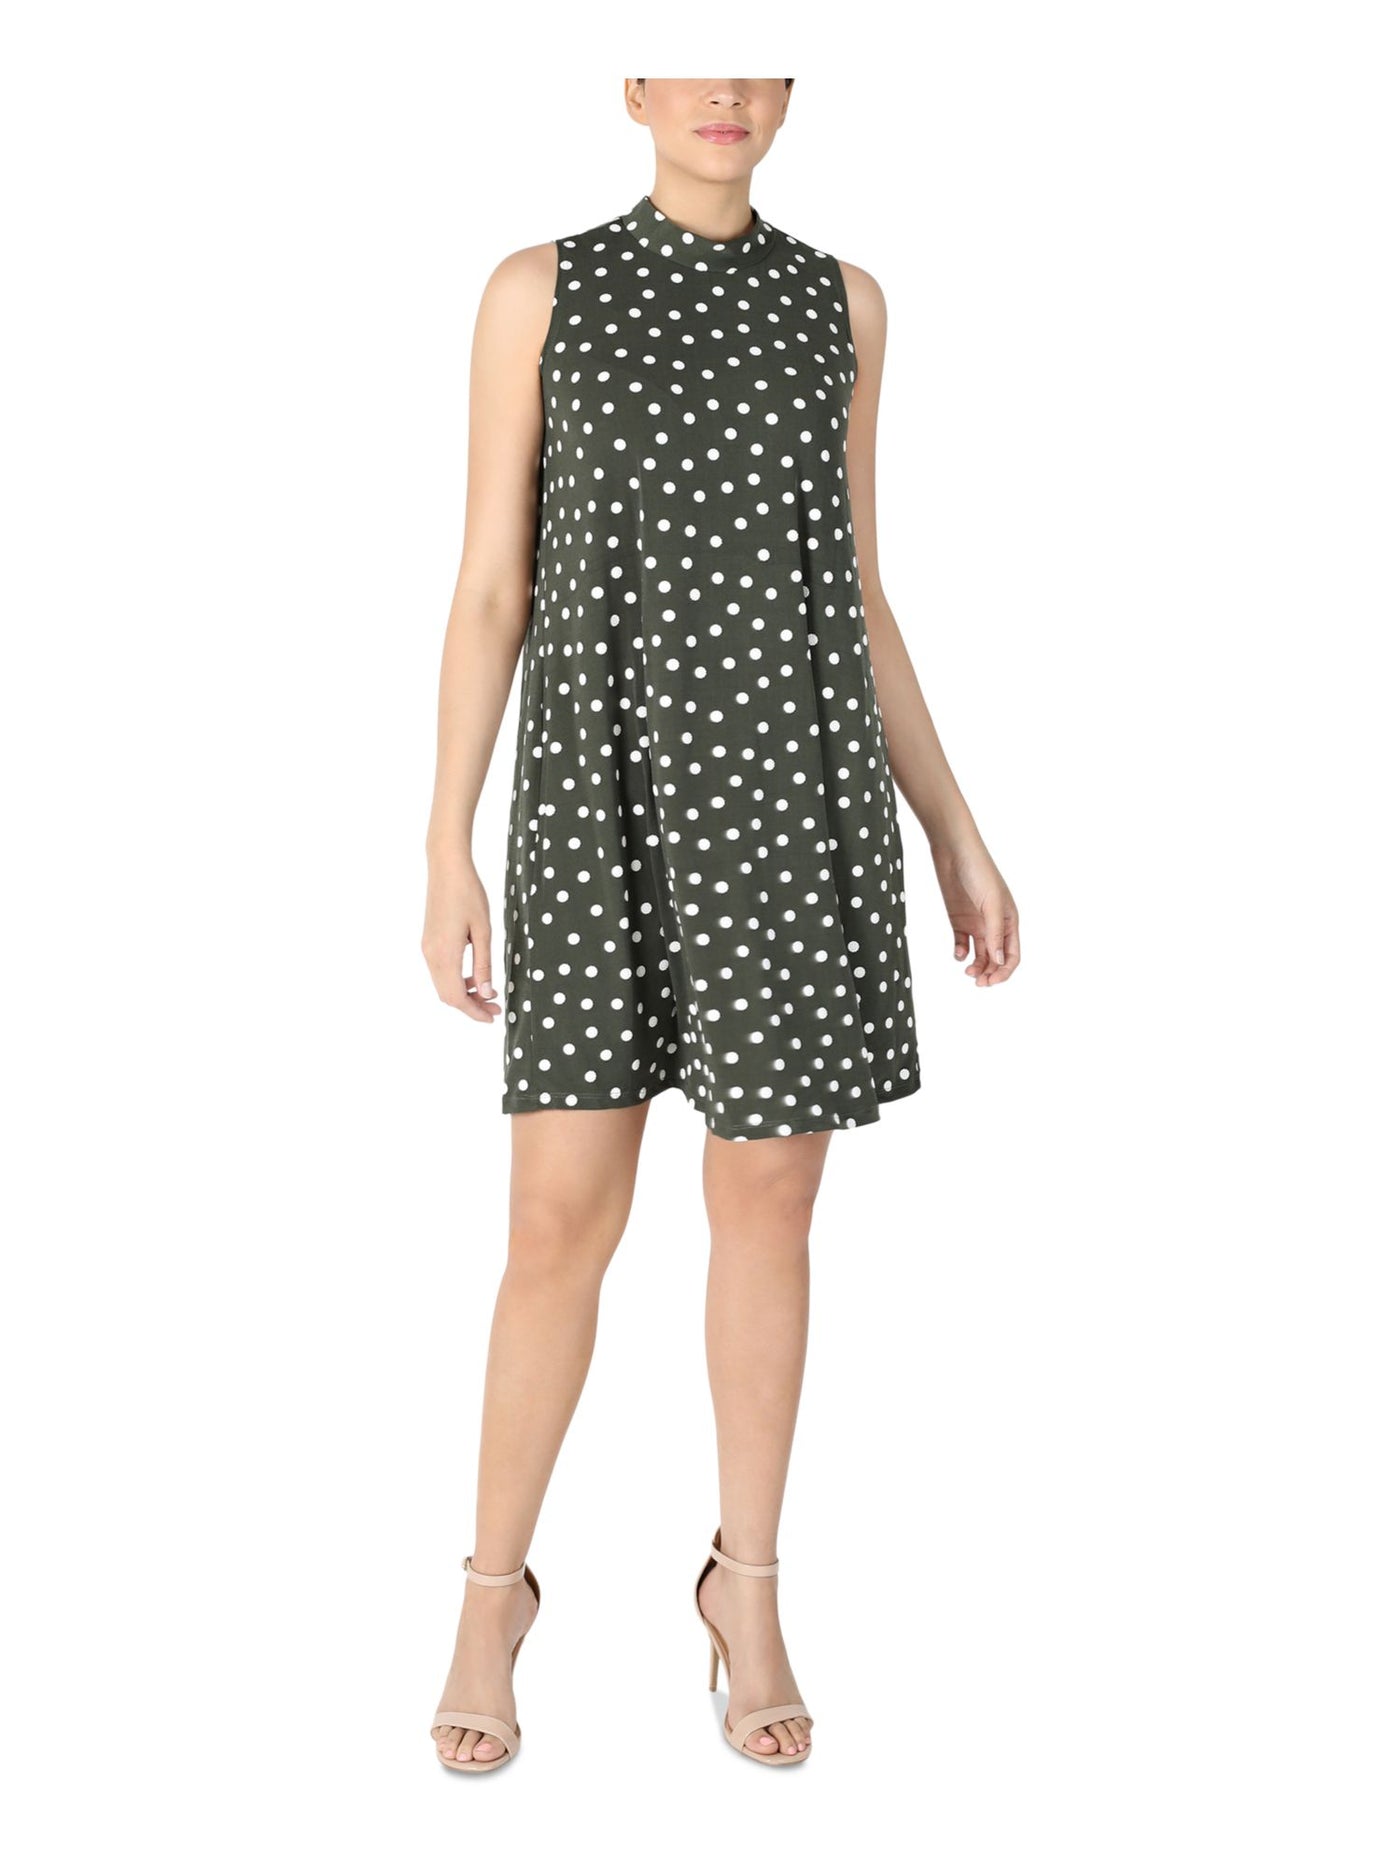 SIGNATURE BY ROBBIE BEE Womens Green Jersey Polka Dot Sleeveless Mock Neck Above The Knee Party Shift Dress Petites PS